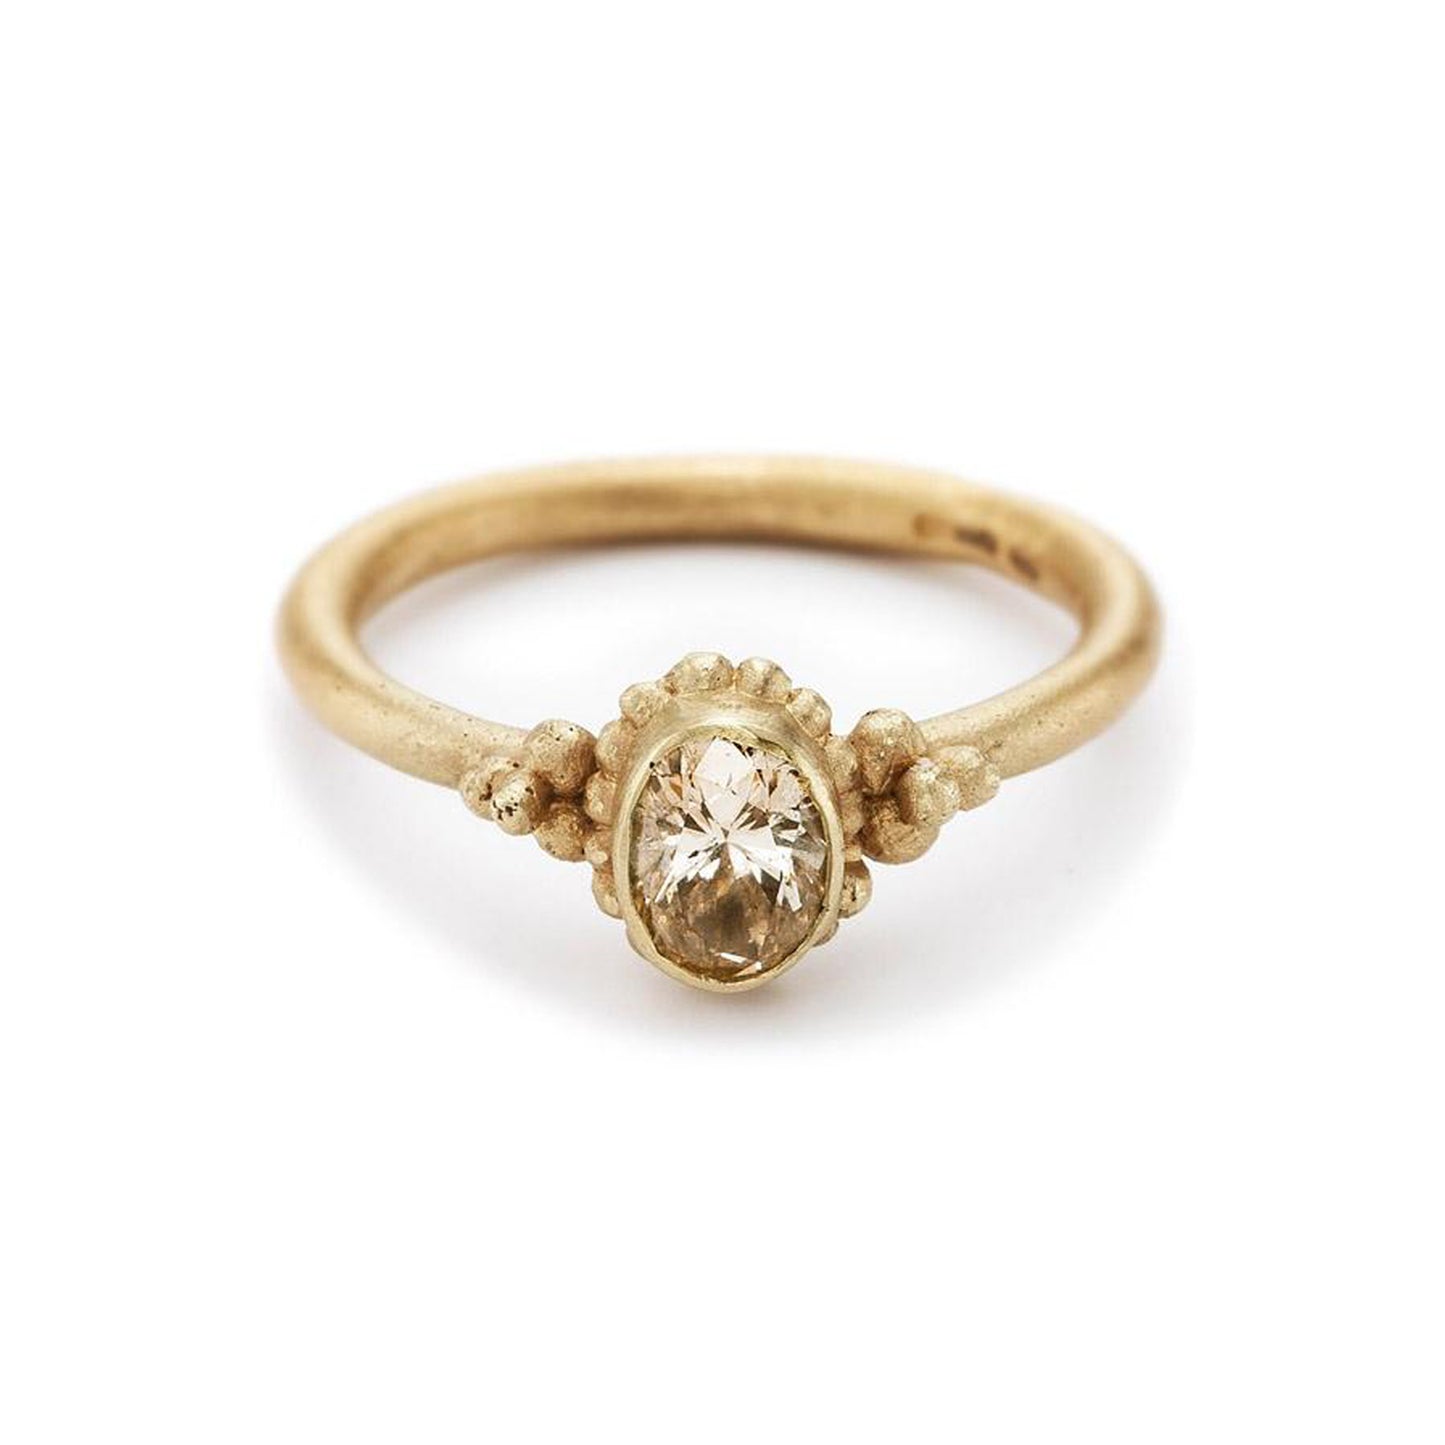 14ct yellow gold Ruth Tomlinson oval Champagne Diamond solitaire ring in bezel setting with granulation bead detail. Alternative engagement ring.